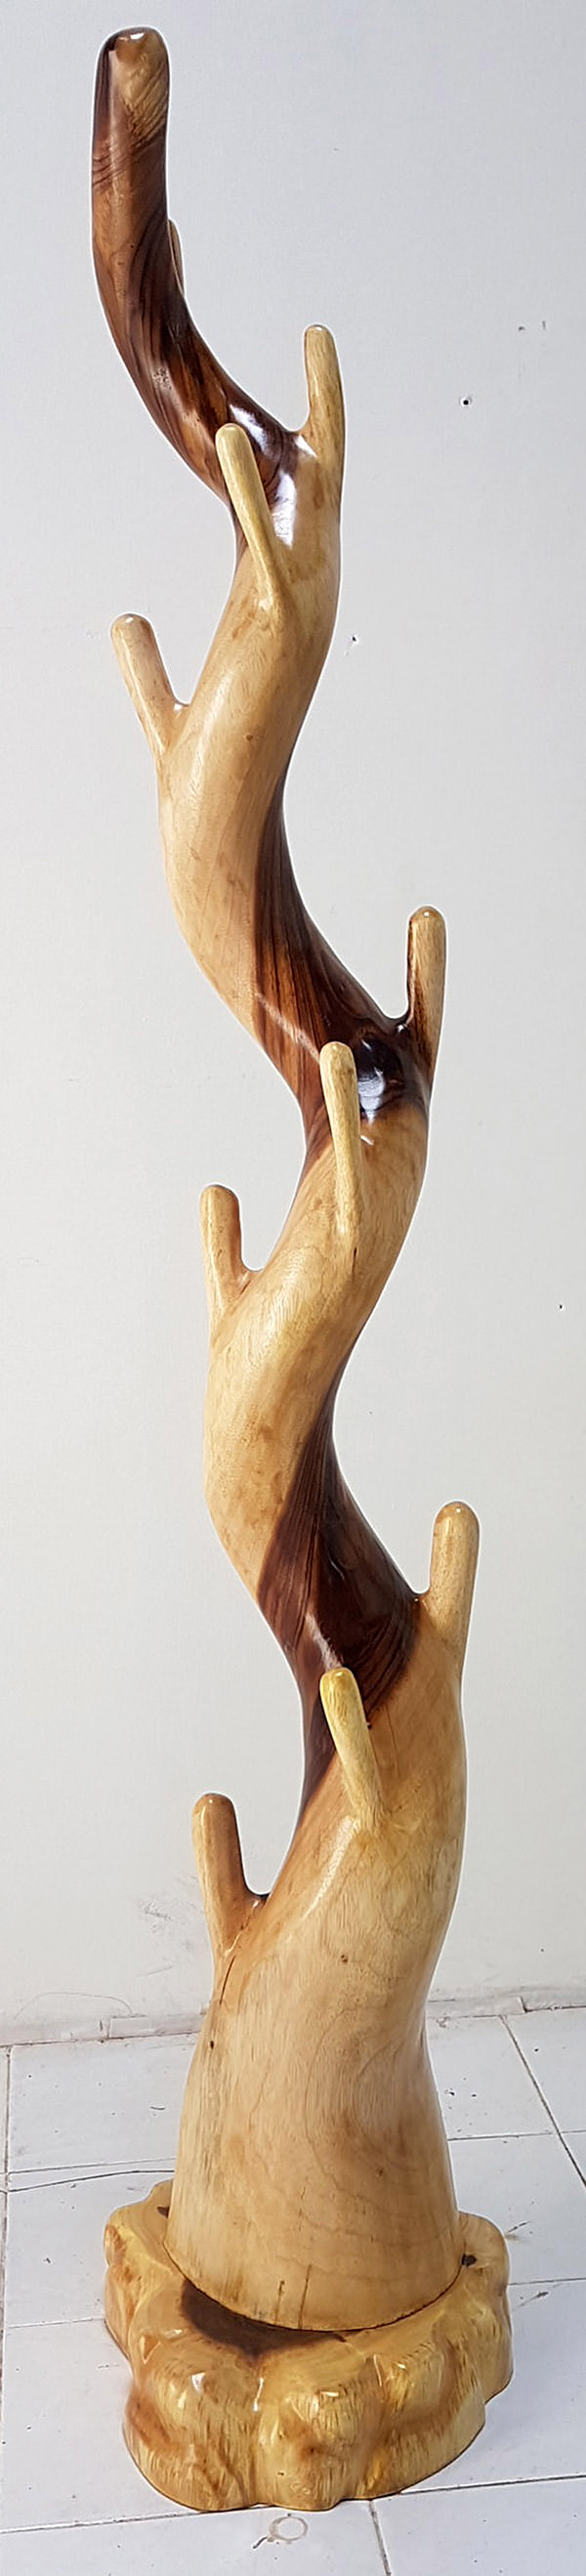 suar coat hanger with a natural stain